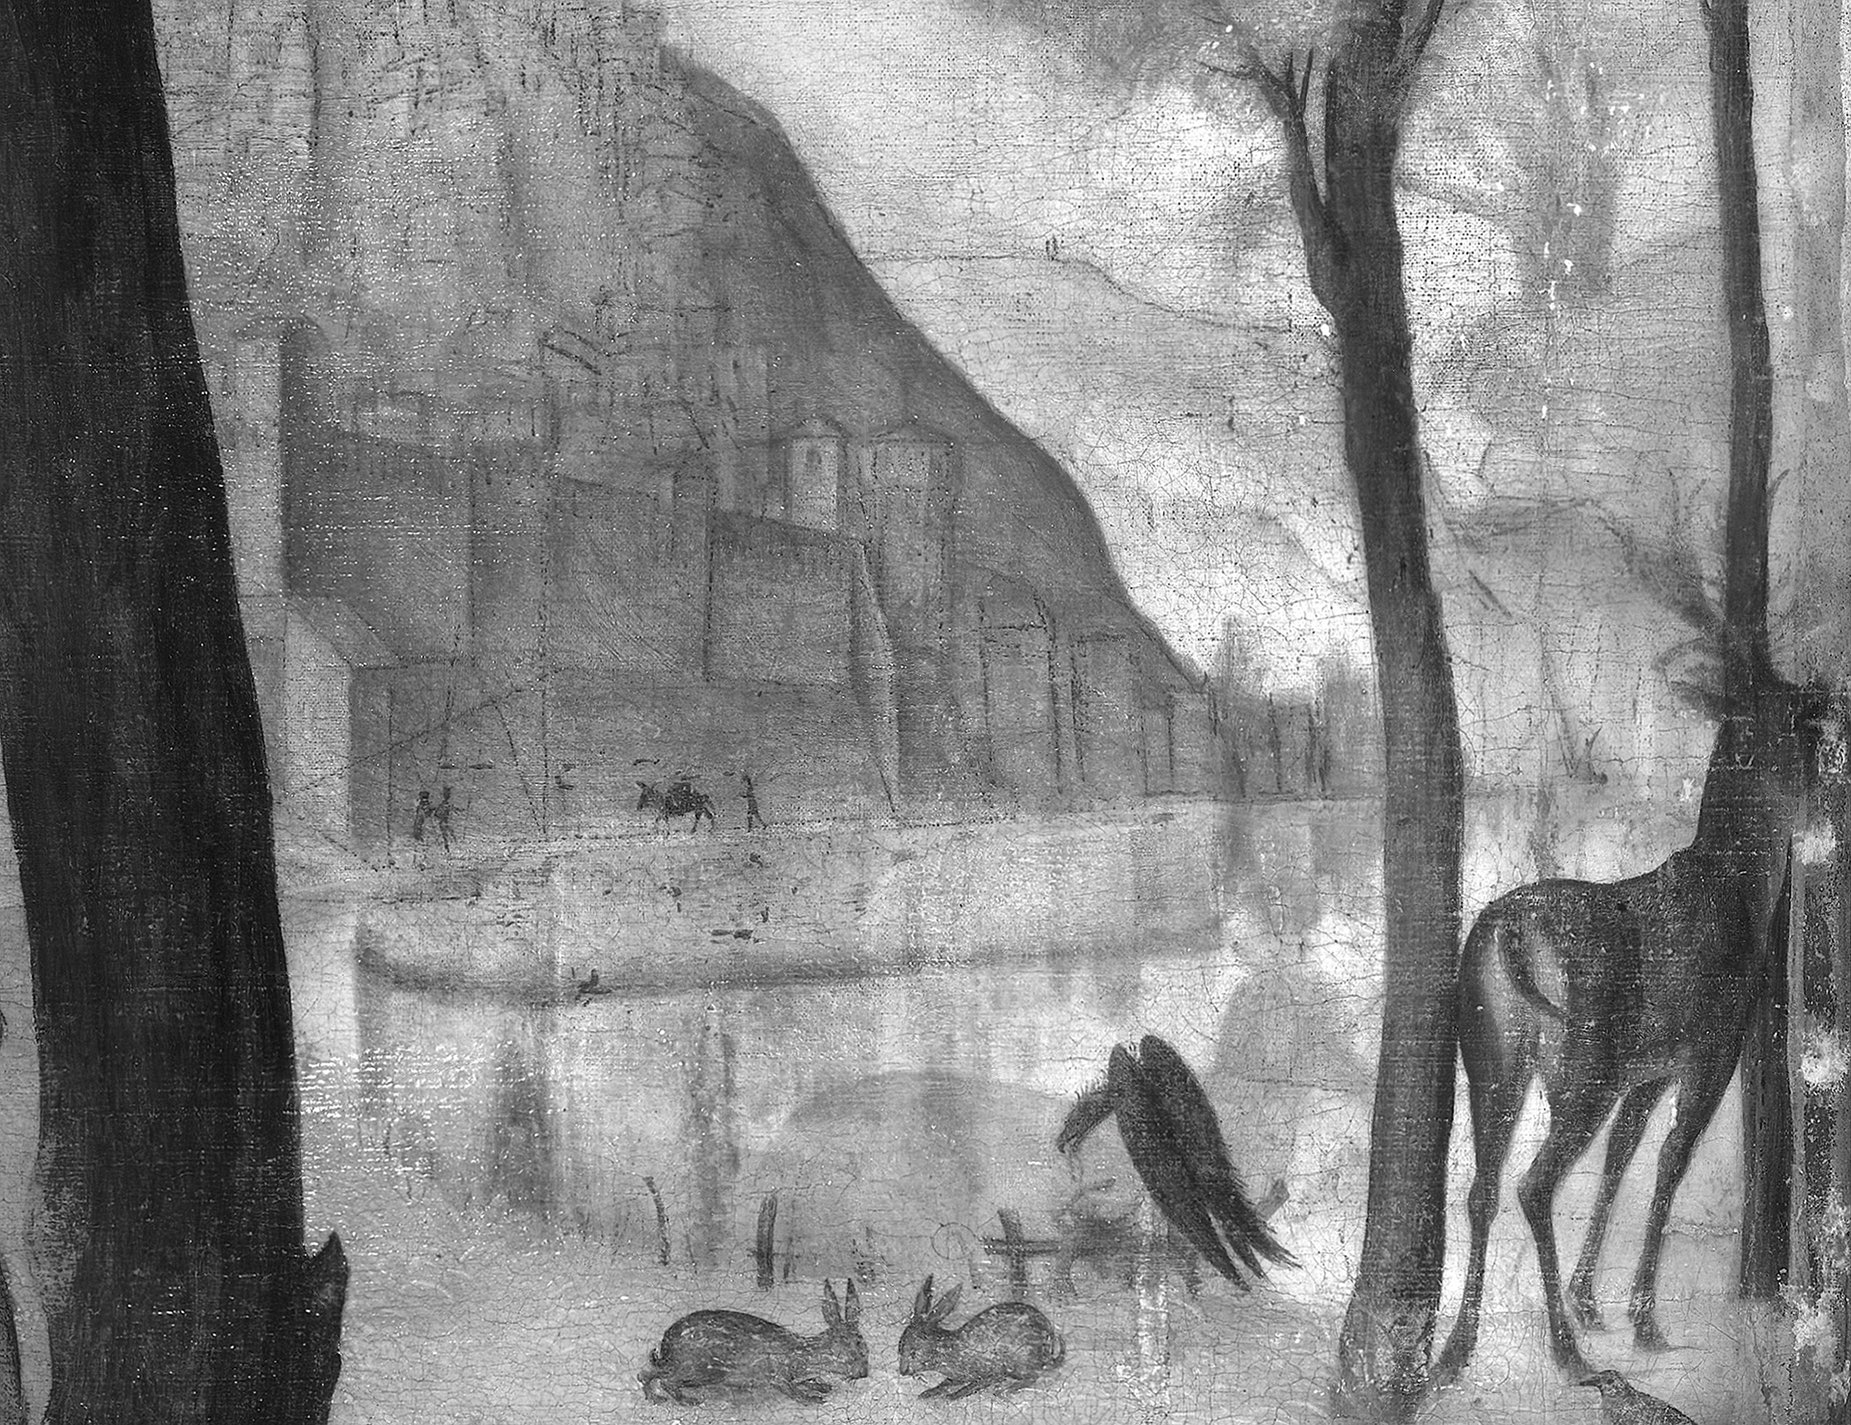 Detail of the infrared image of Carpaccio “Young Knight in a Landscape”